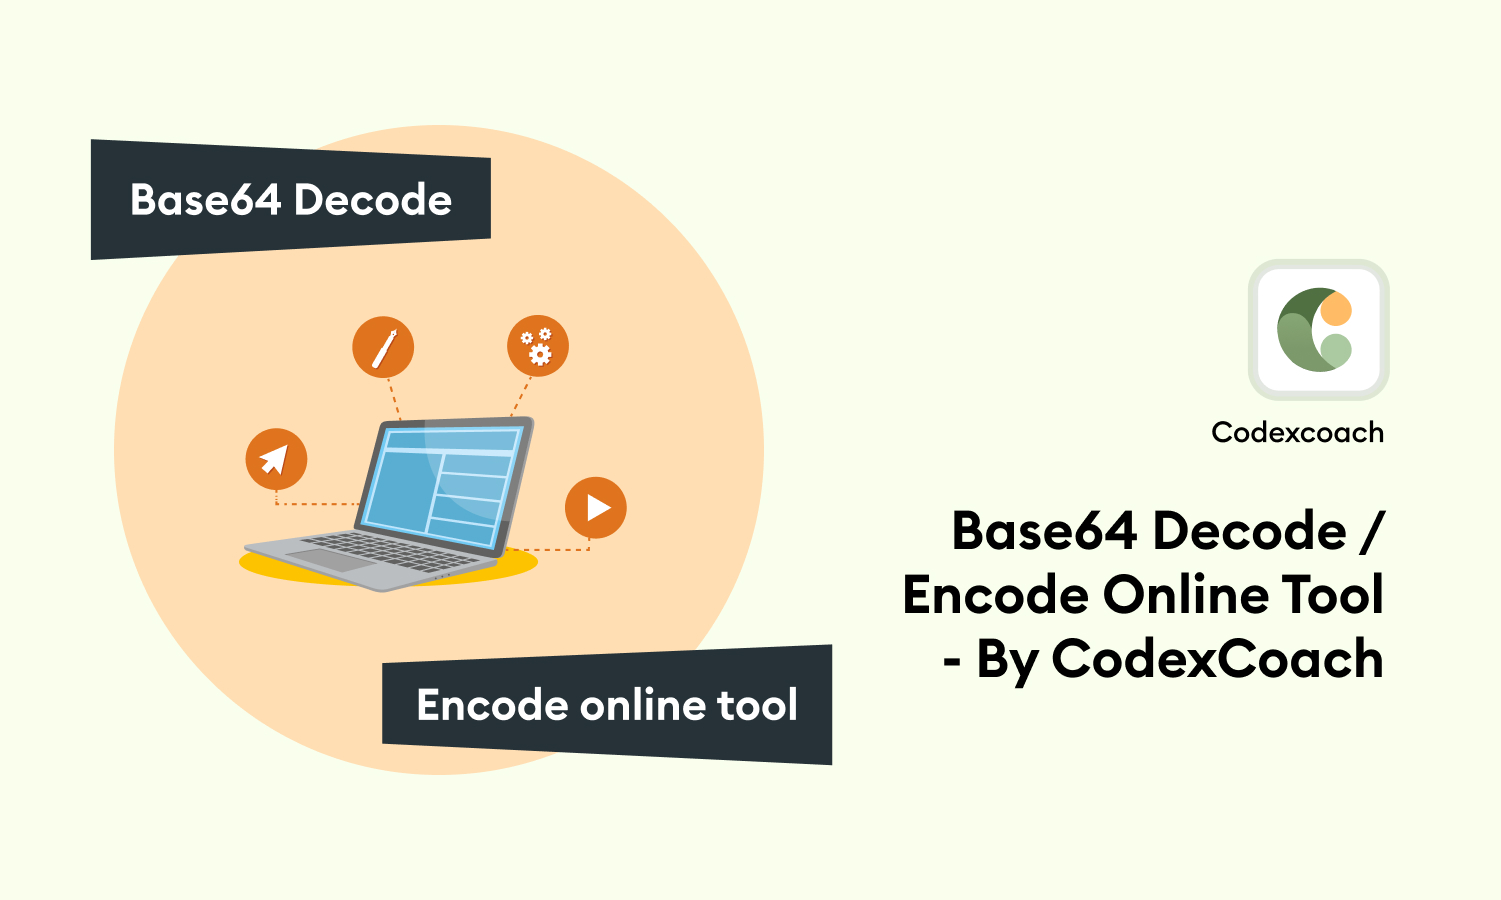 Base64 Decode Encode Online Tool - By CodexCoach